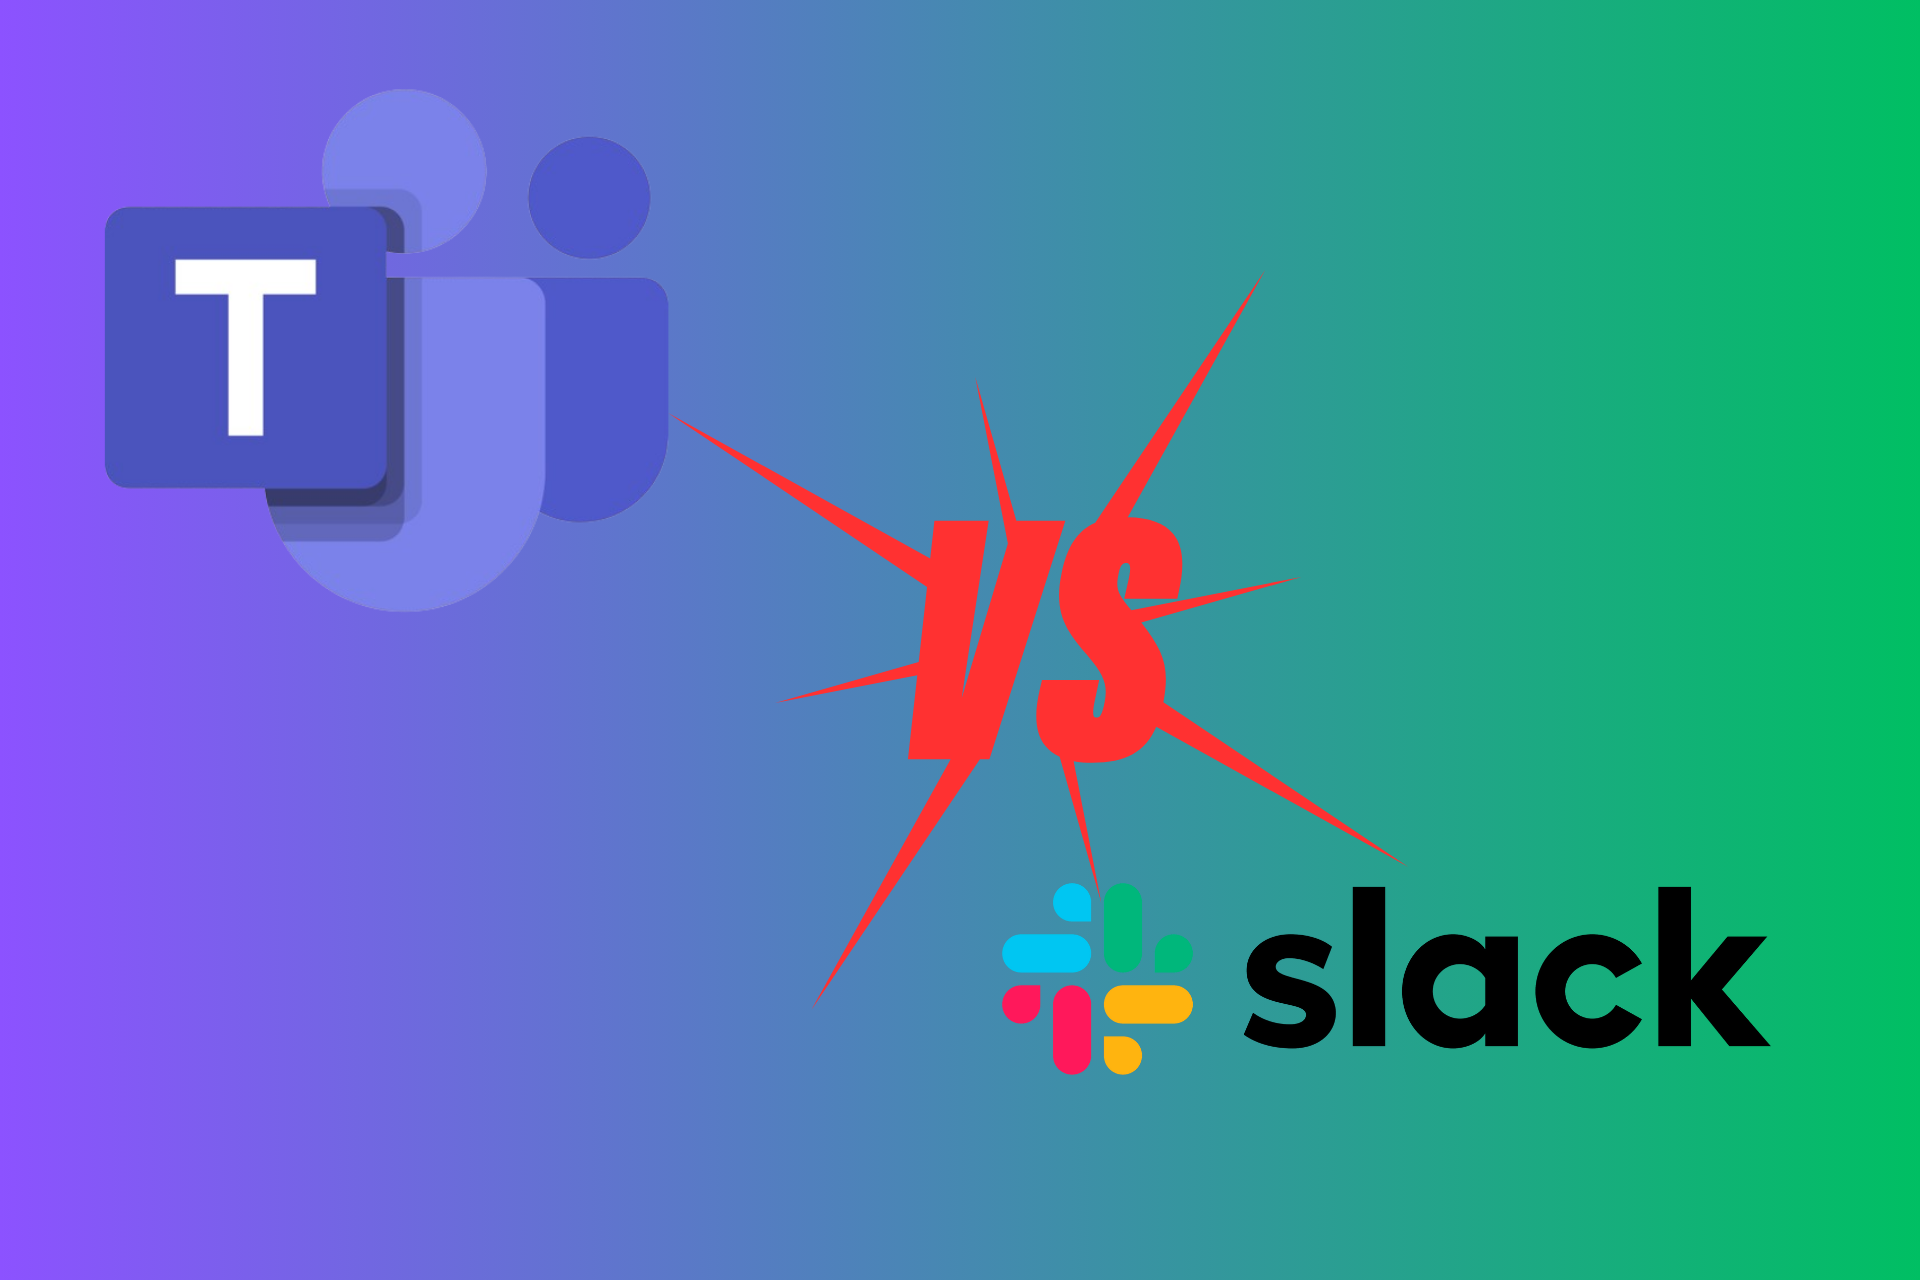 Microsoft Teams becomes more popular in the Chat arena than slack